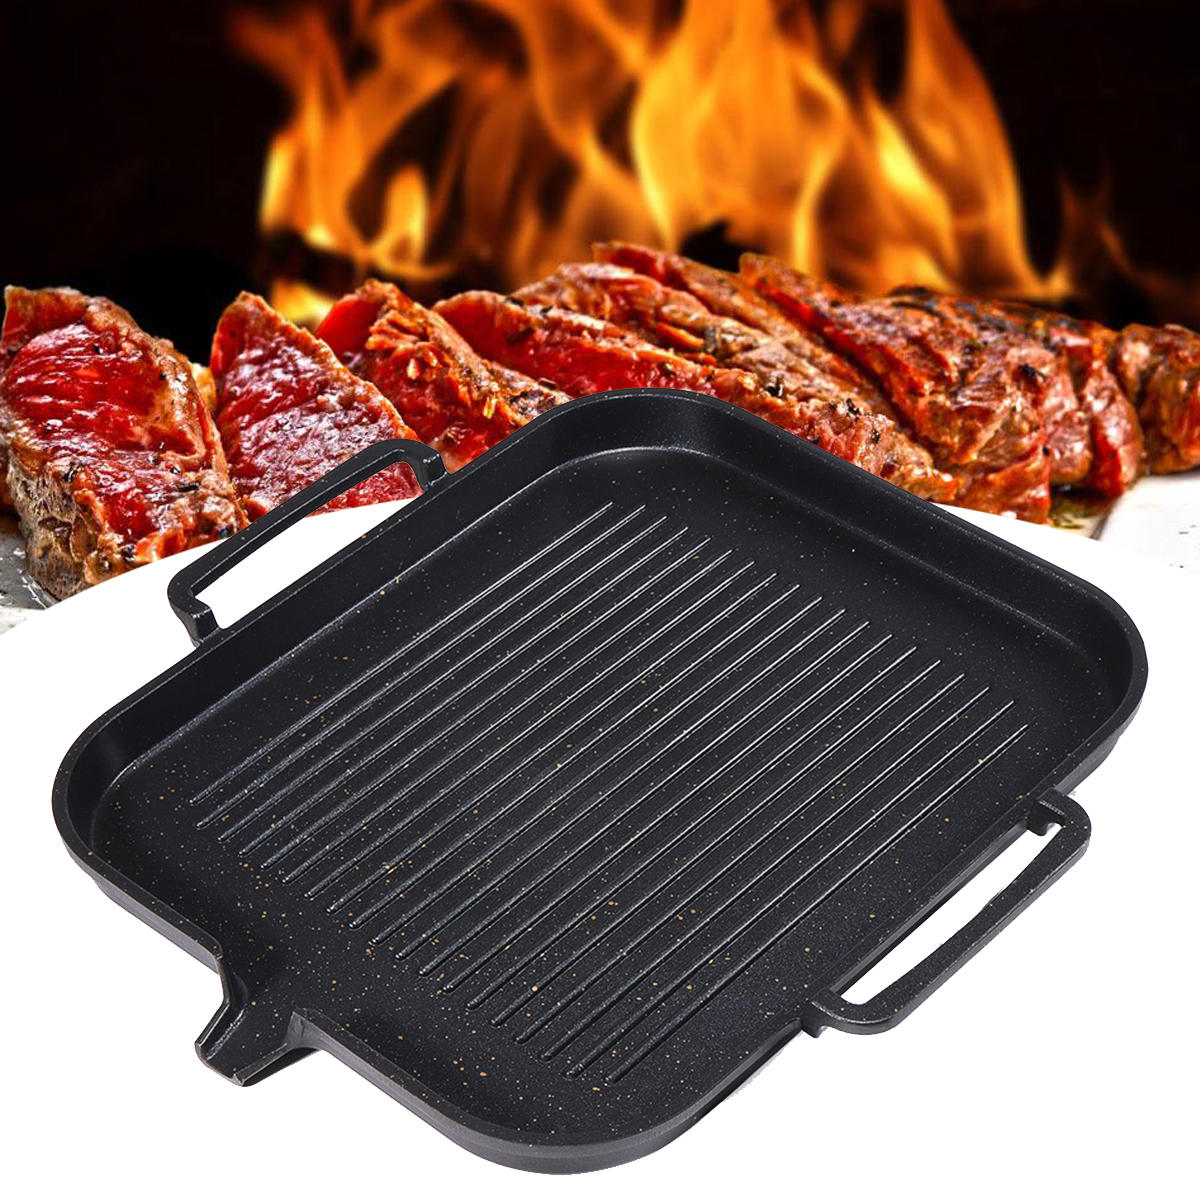 2-4 People BBQ Barbecue Aluminum Frying Grill Pan Plate Non Stick Coating Cookware Induction Cooking